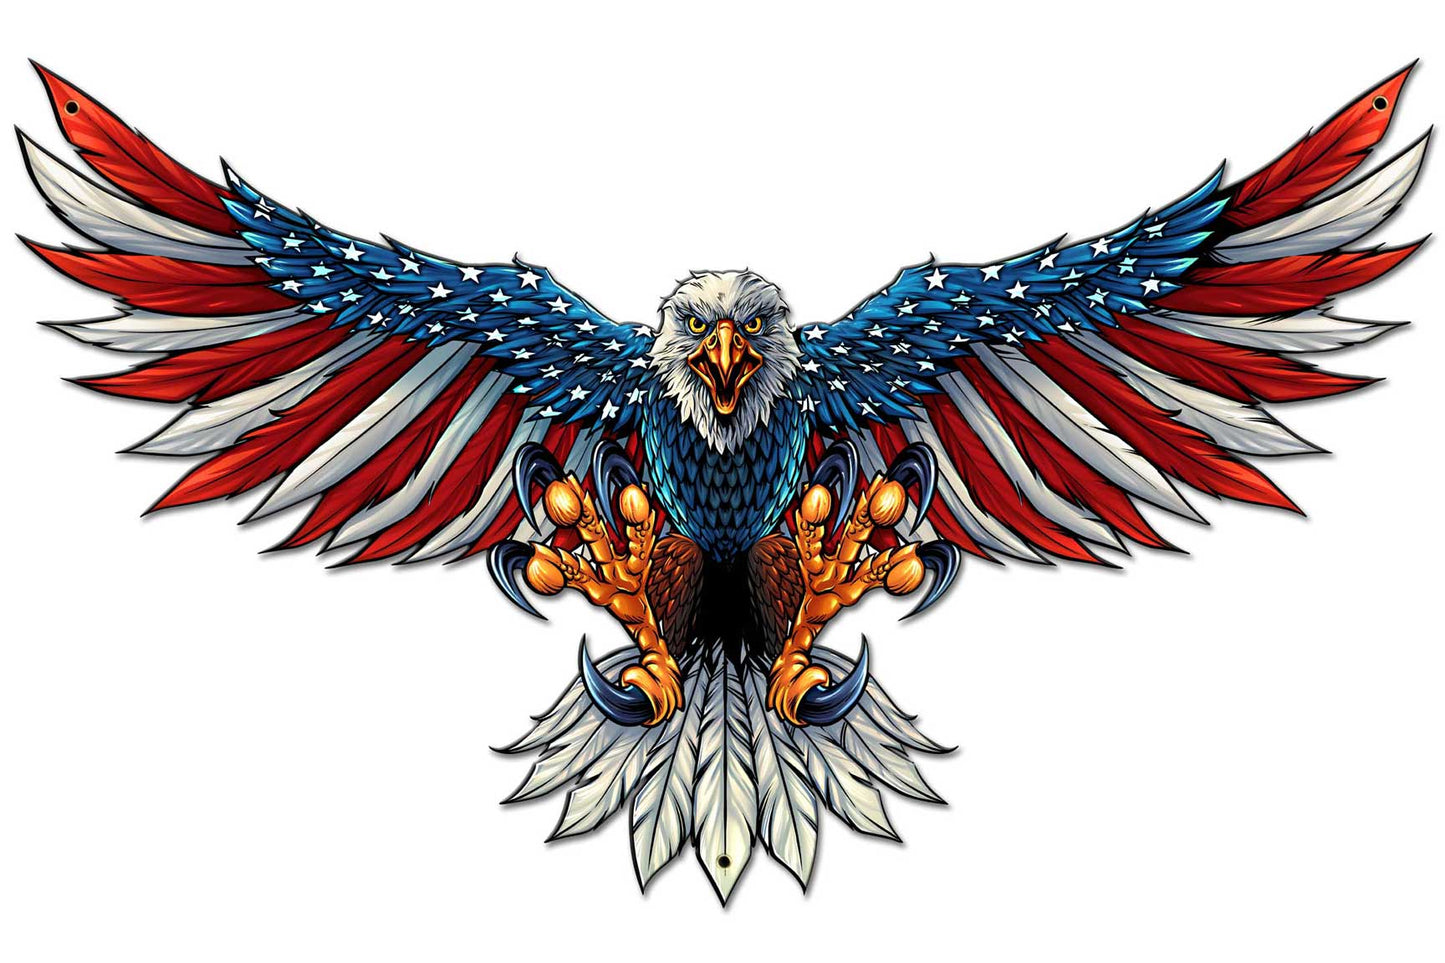 Eagle With US Flag Wing Spread Vintage Sign